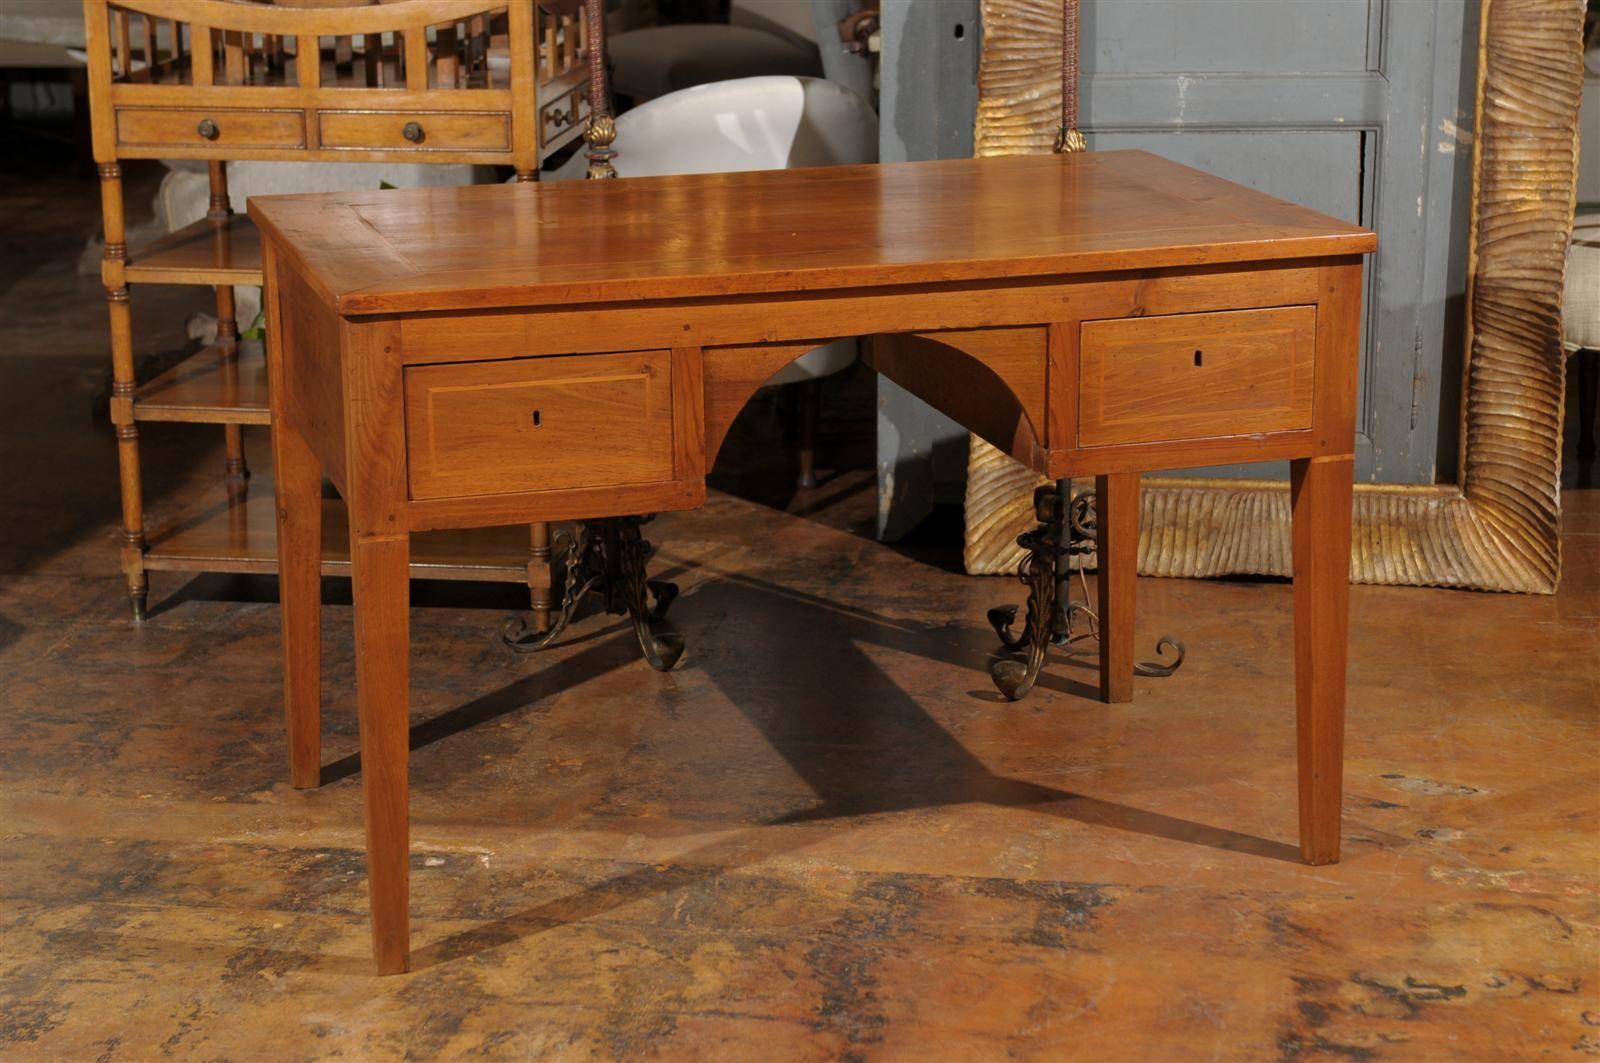 An Italian walnut partner’s desk from the turn of the century with banding, four drawers and arched apron. This Italian narrow partner’s desk from the late 19th century features a rectangular top with quarter veneer and banding over an apron, arched